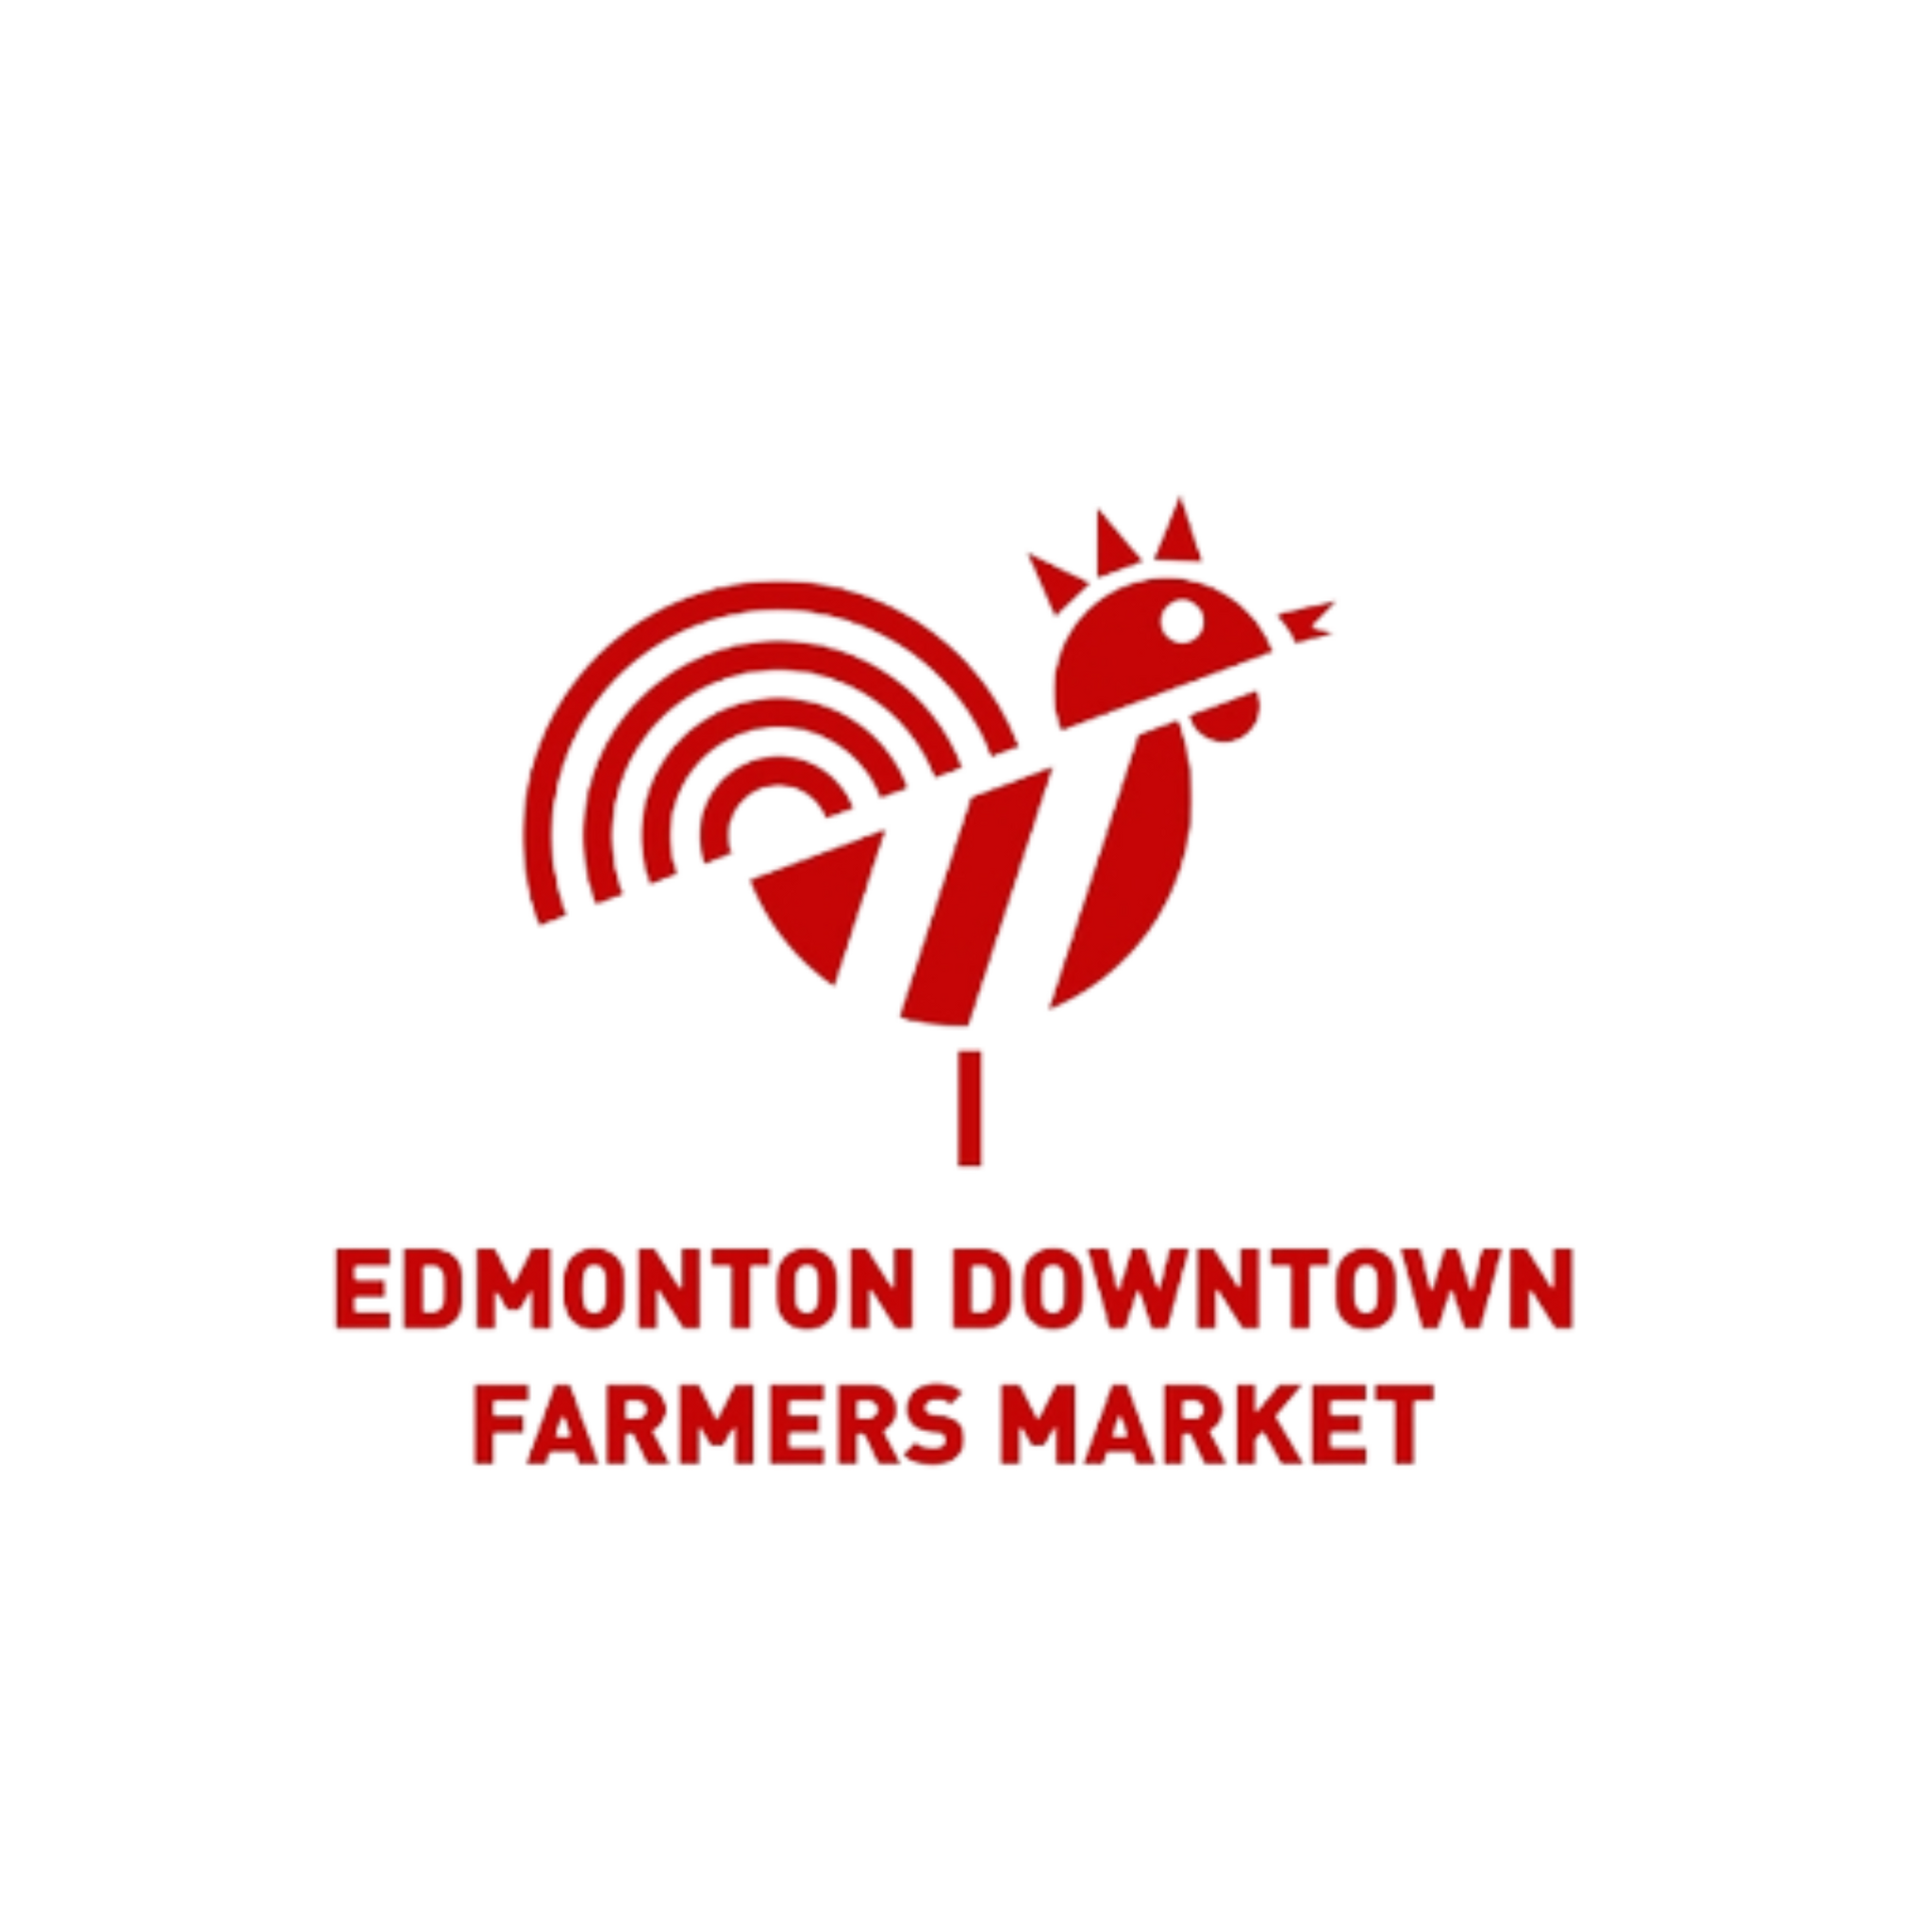 The Edmonton Farmers Market is constantly providing available vendor booth spaces at their live events in Edmonton.